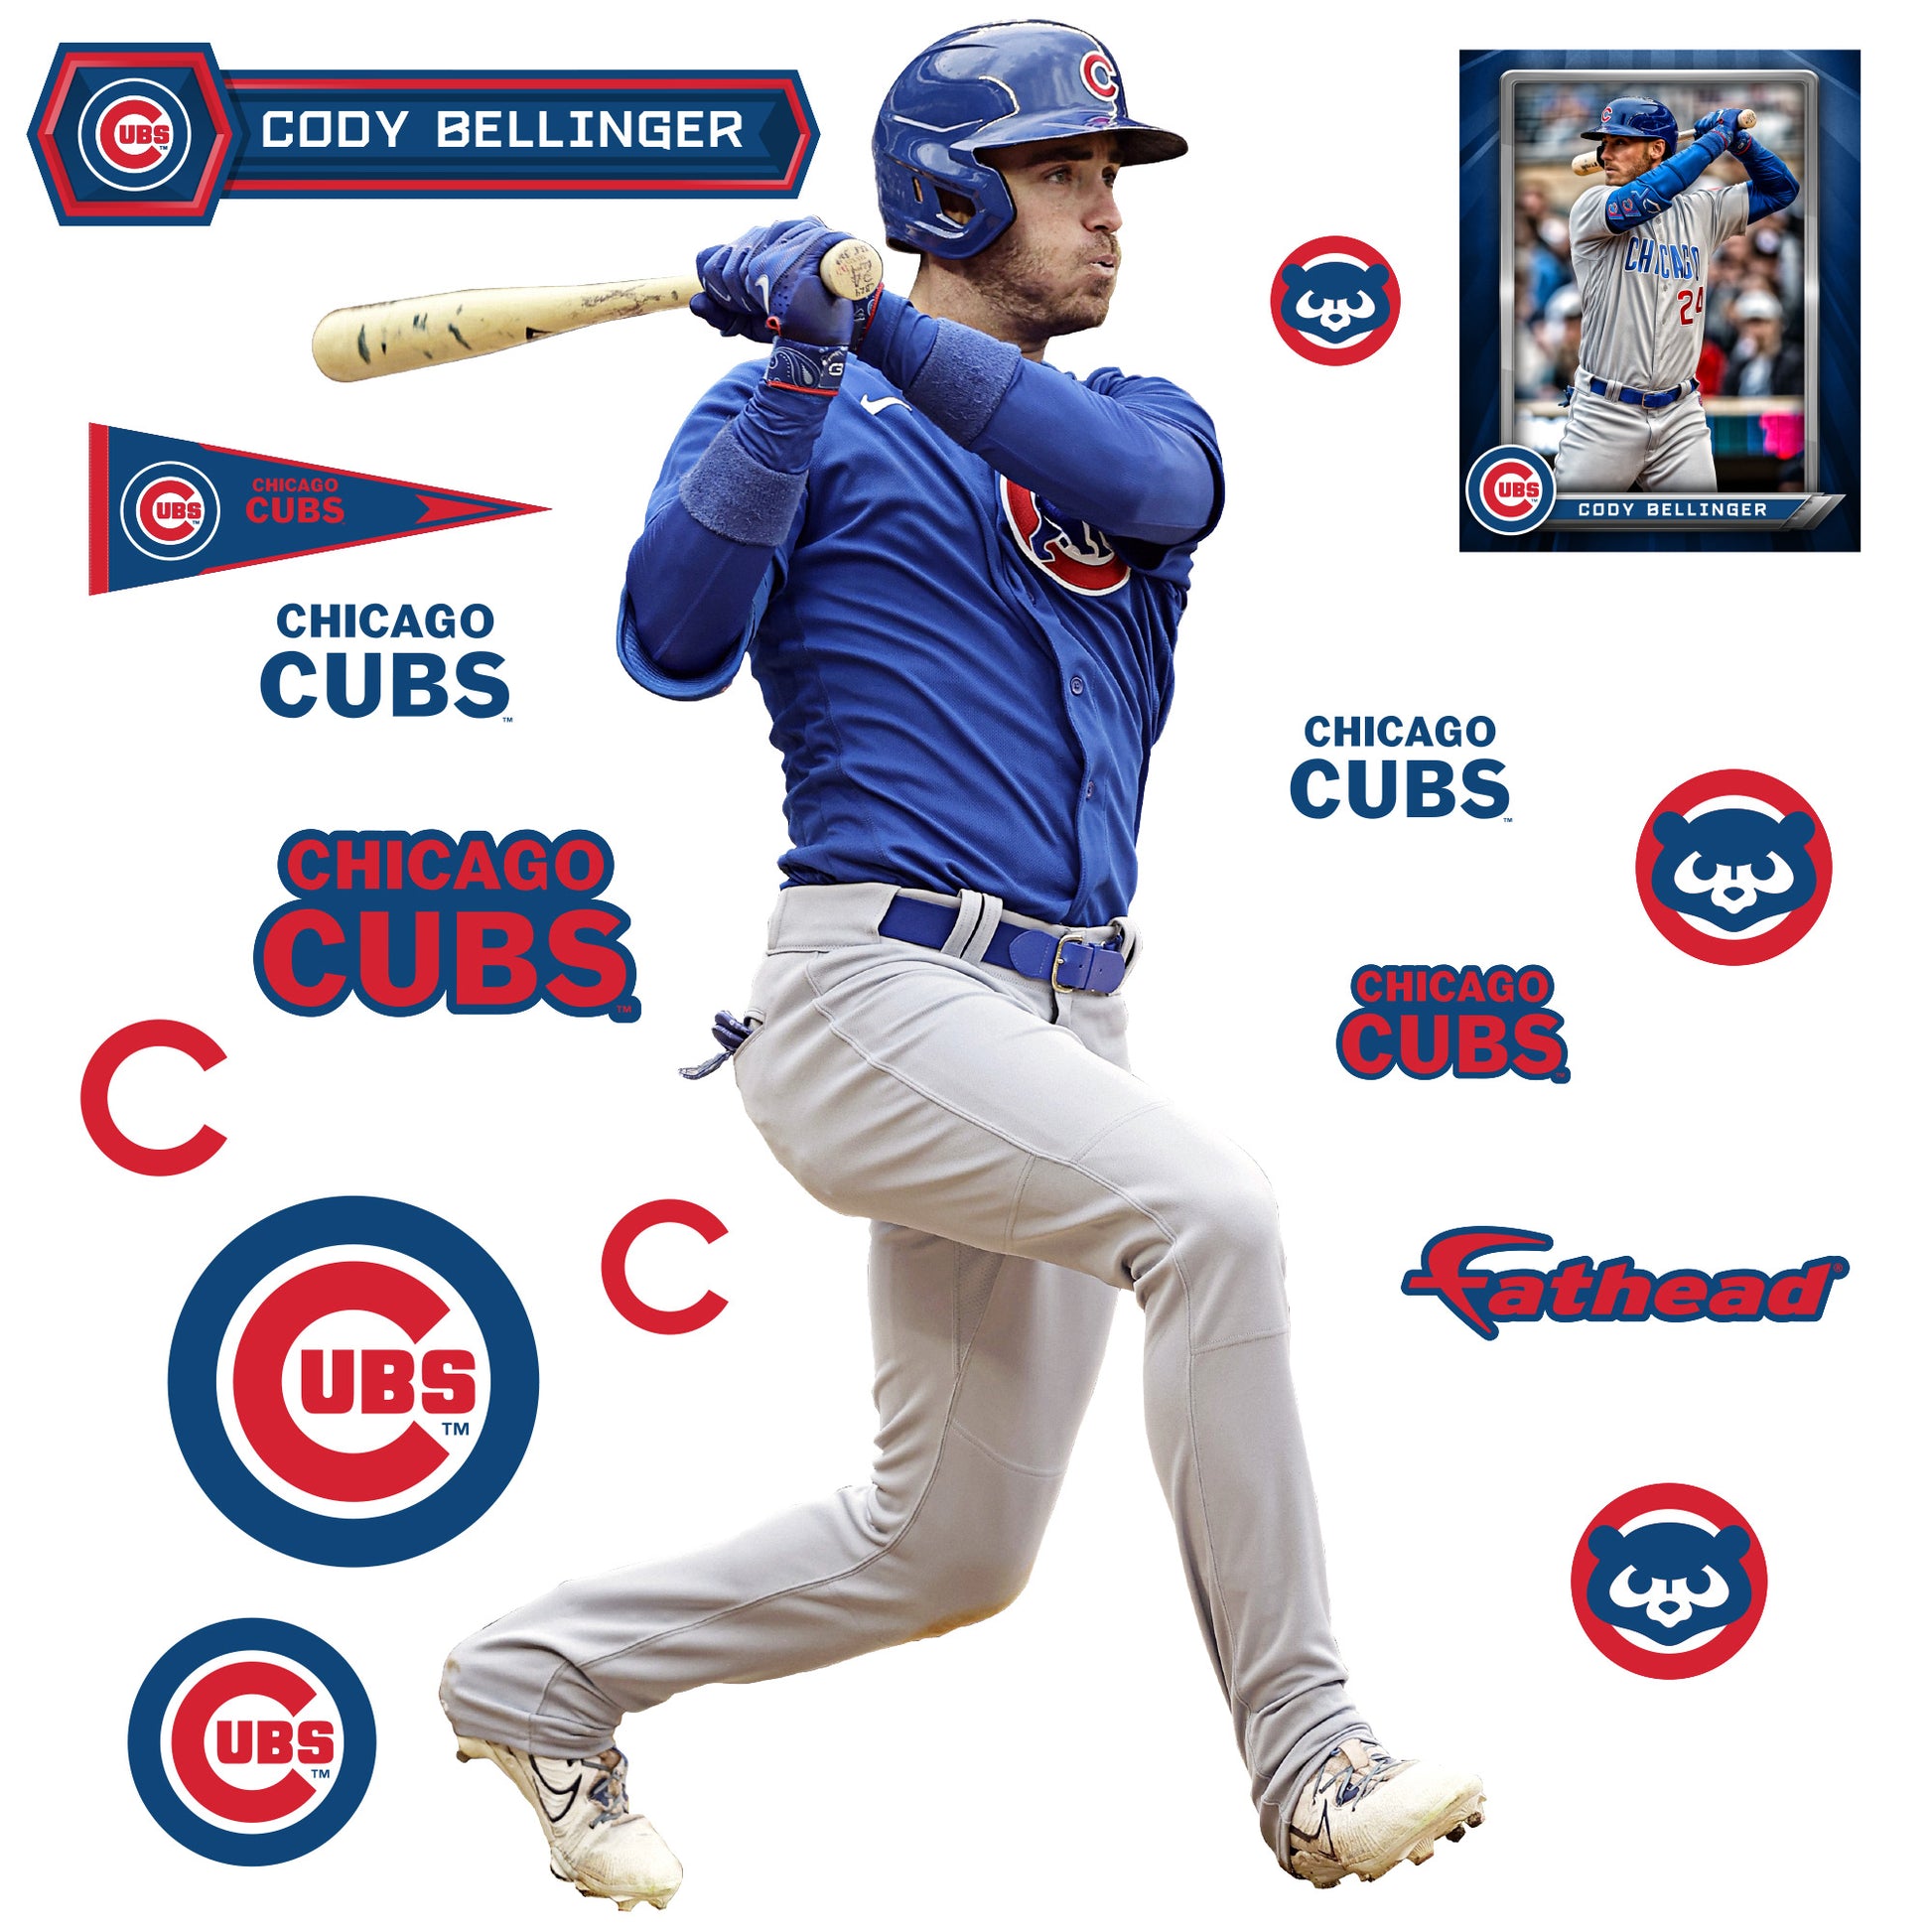 Chicago Cubs: Cody Bellinger 2023 - Officially Licensed MLB Removable  Adhesive Decal